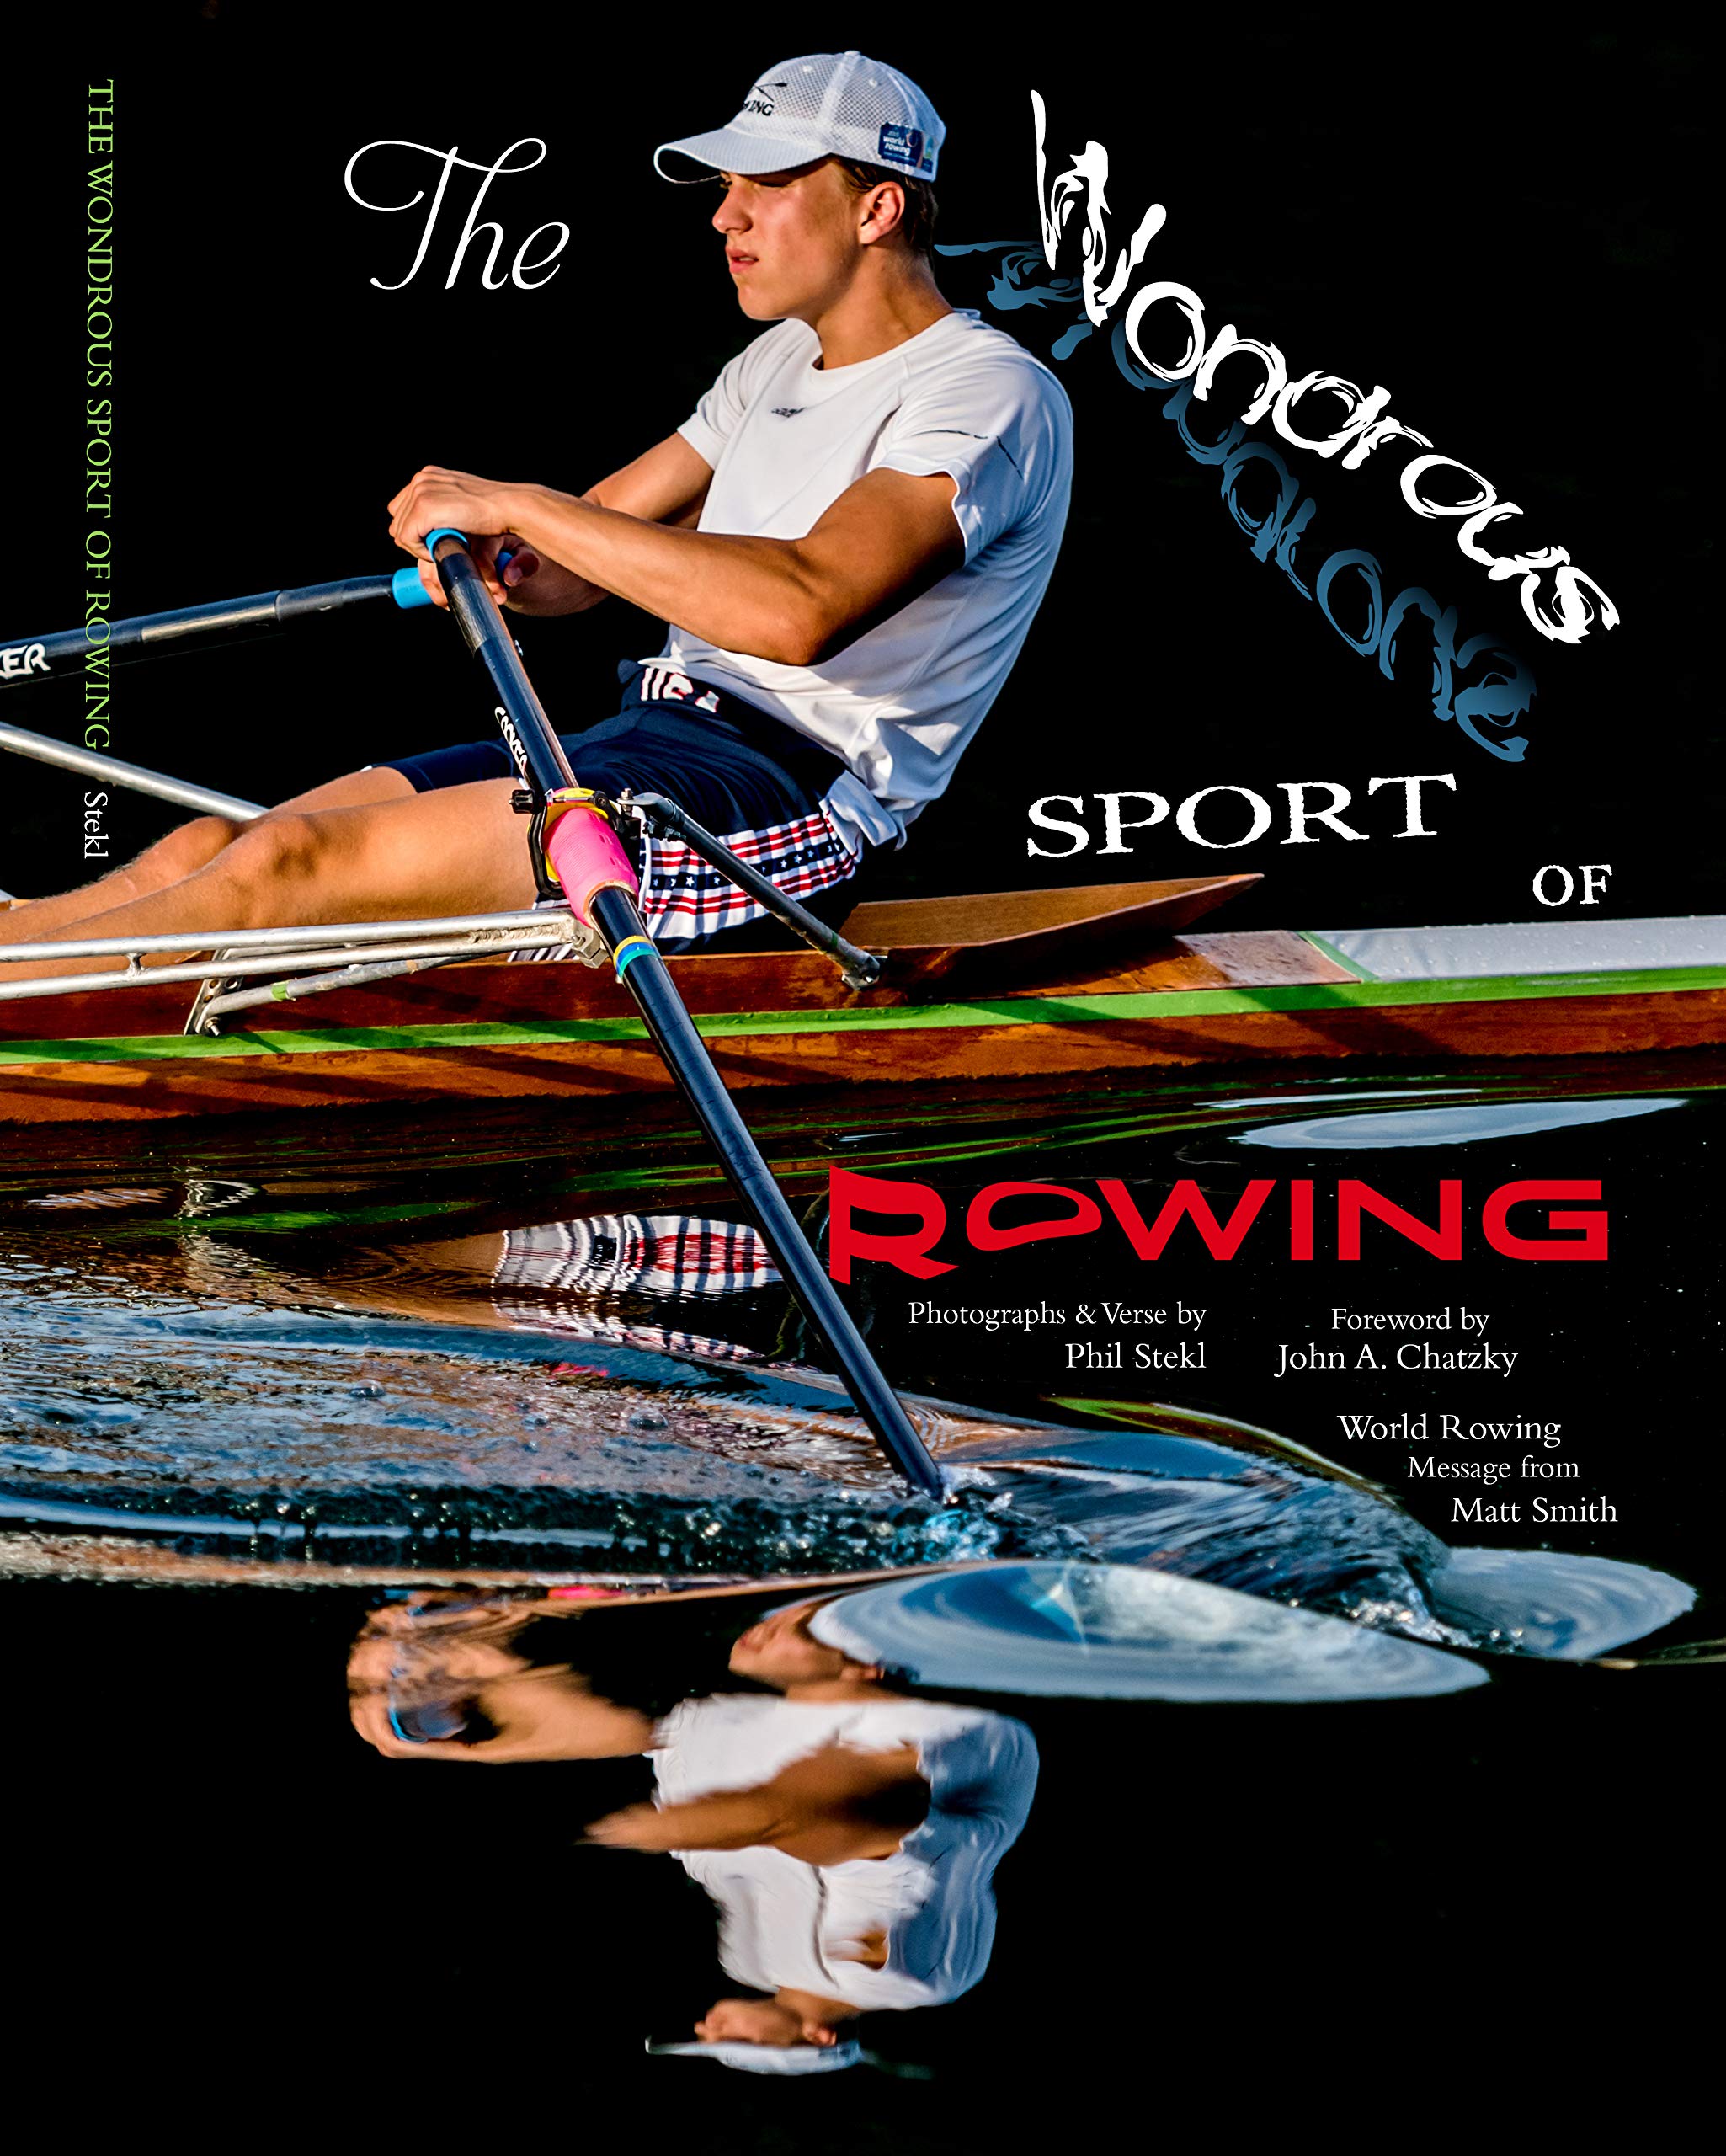 The Wondrous Sport of Rowing